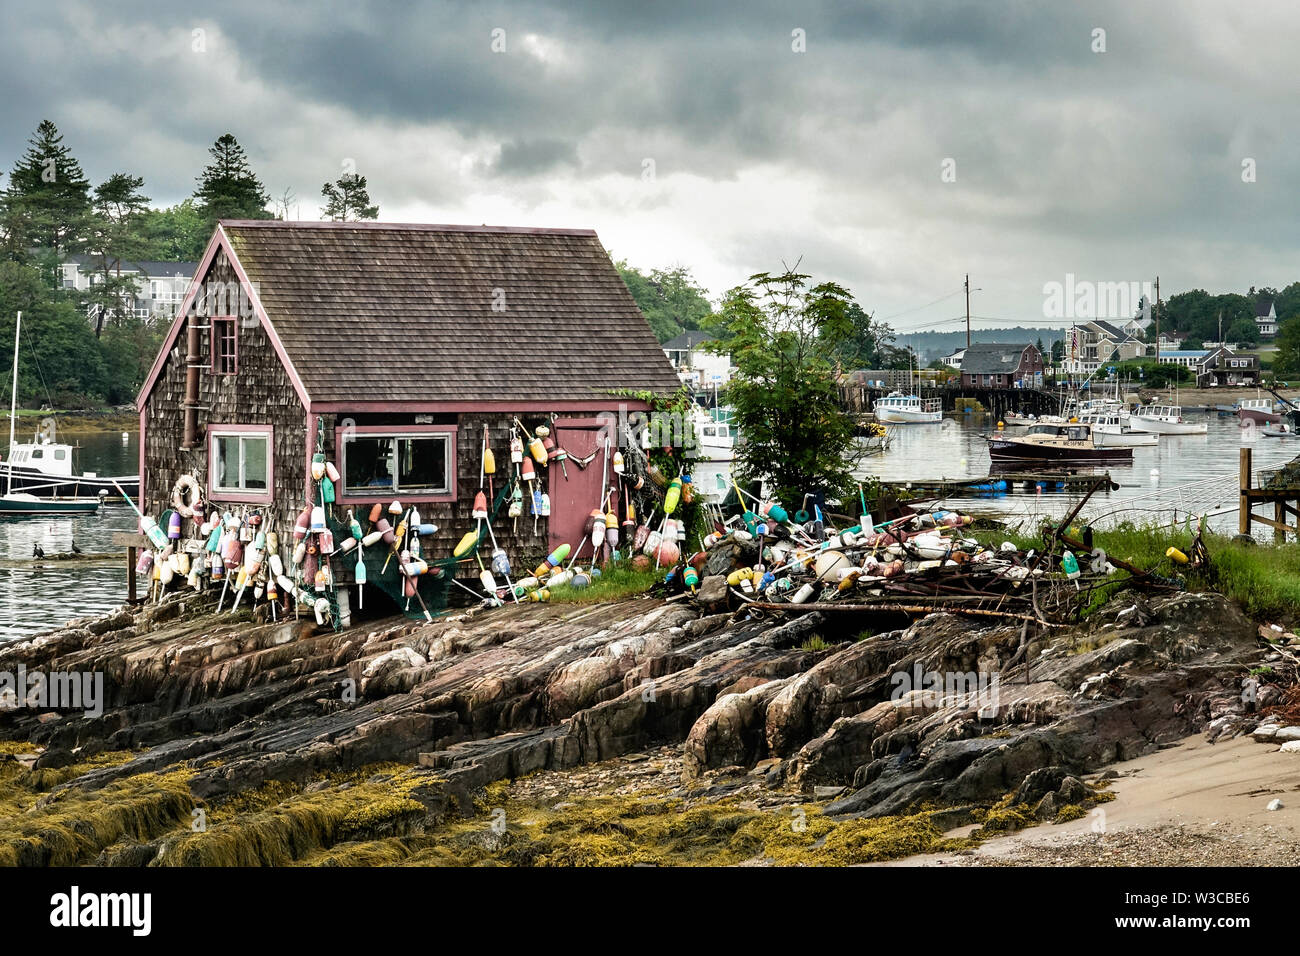 Historic Bailey Fish House covered in lobster buoys along Mackerel Cove on Bailey Island on a stormy summers day in Harpswell, Maine. Stock Photo